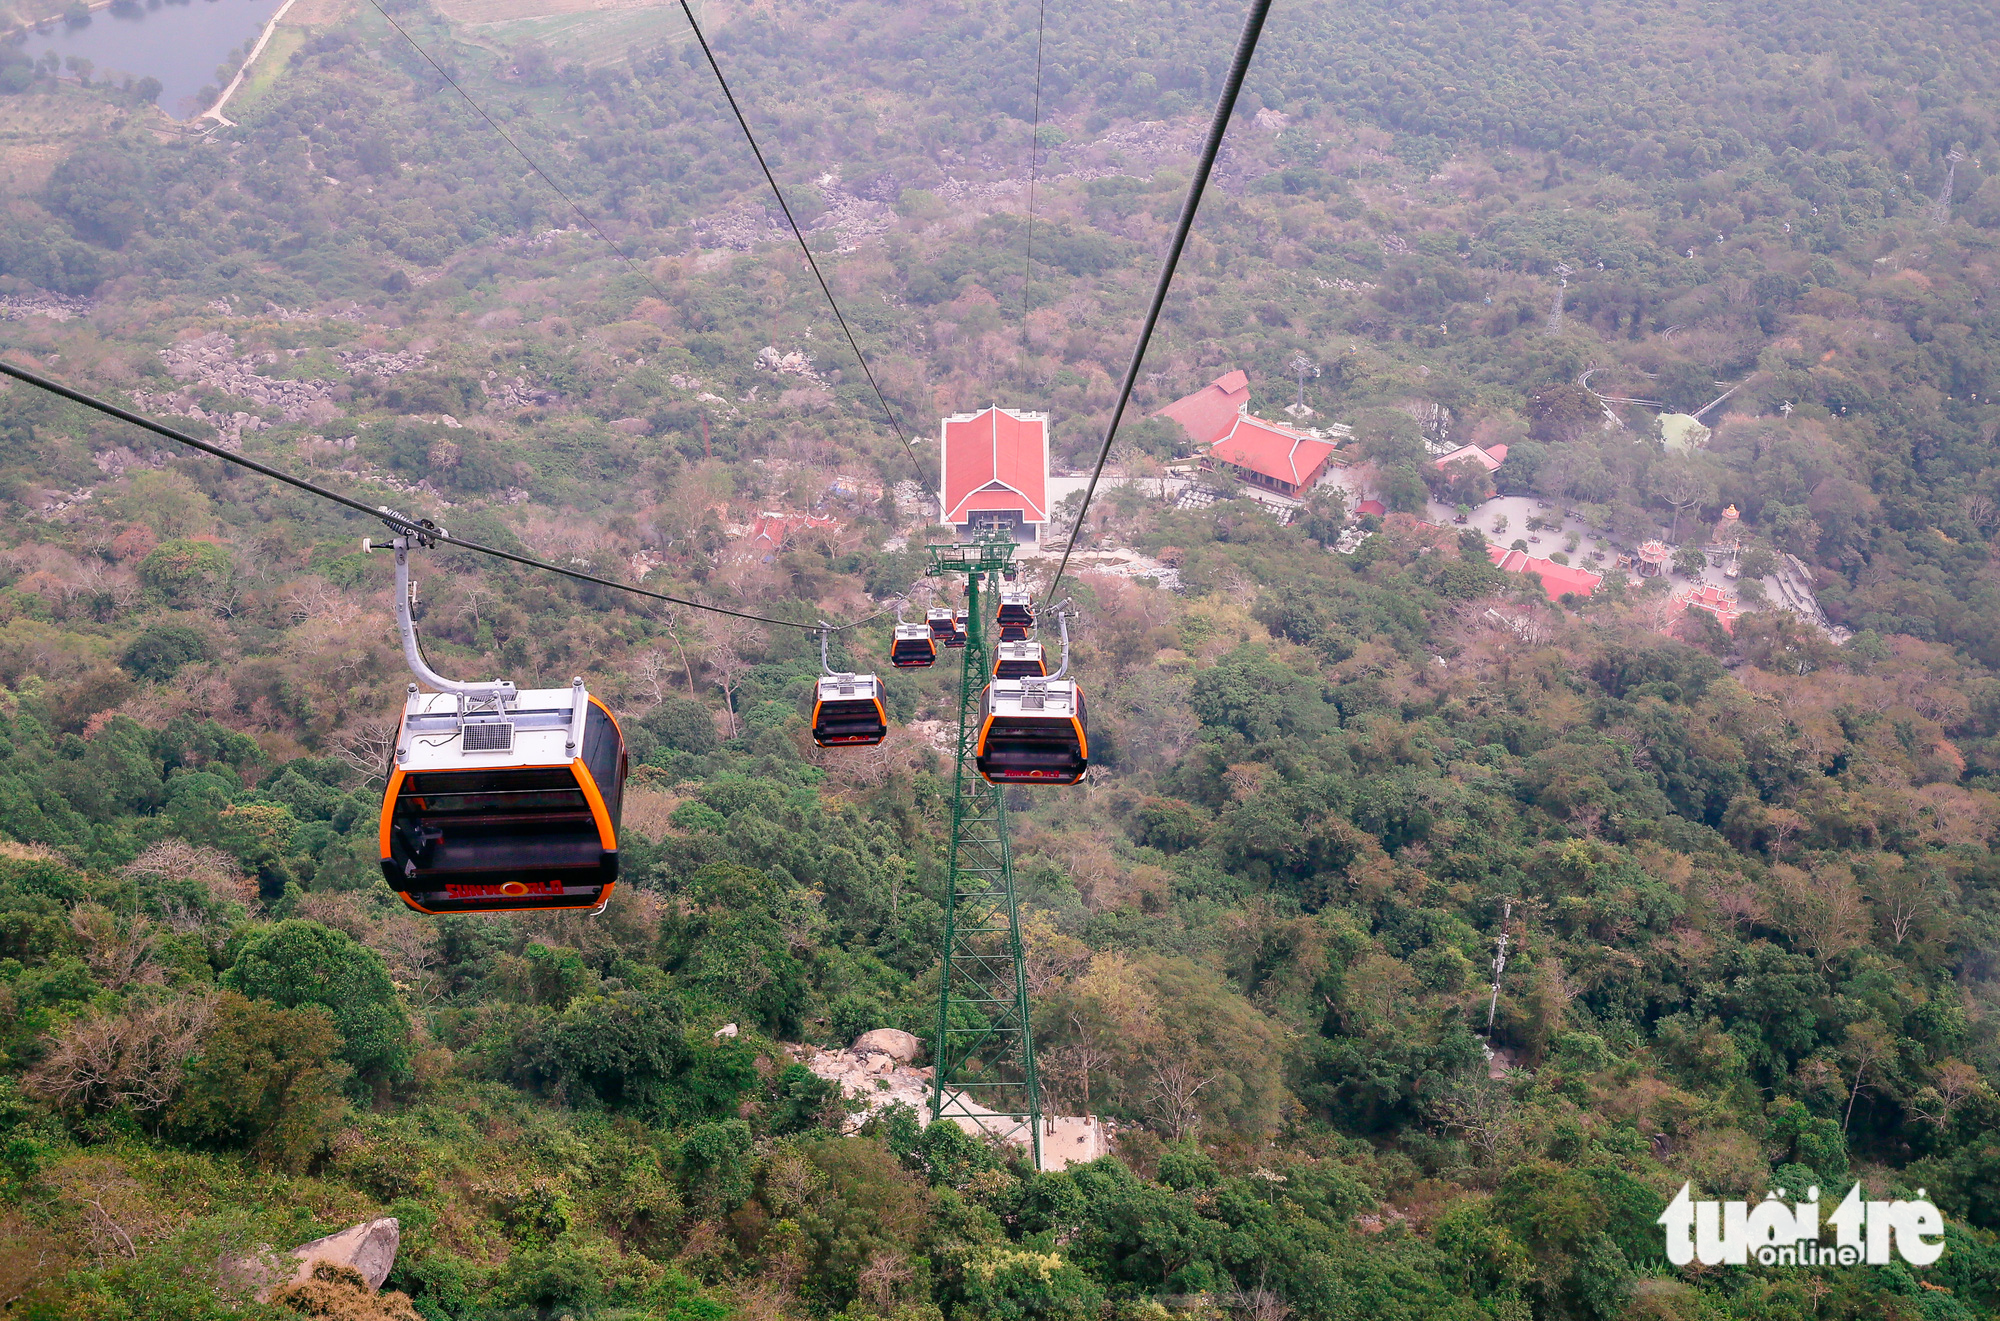 Cable cars transport visitors to and from the top of the Ba Den Mountain in Tay Ninh Province. Photo: Chau Tuan / Tuoi Tre